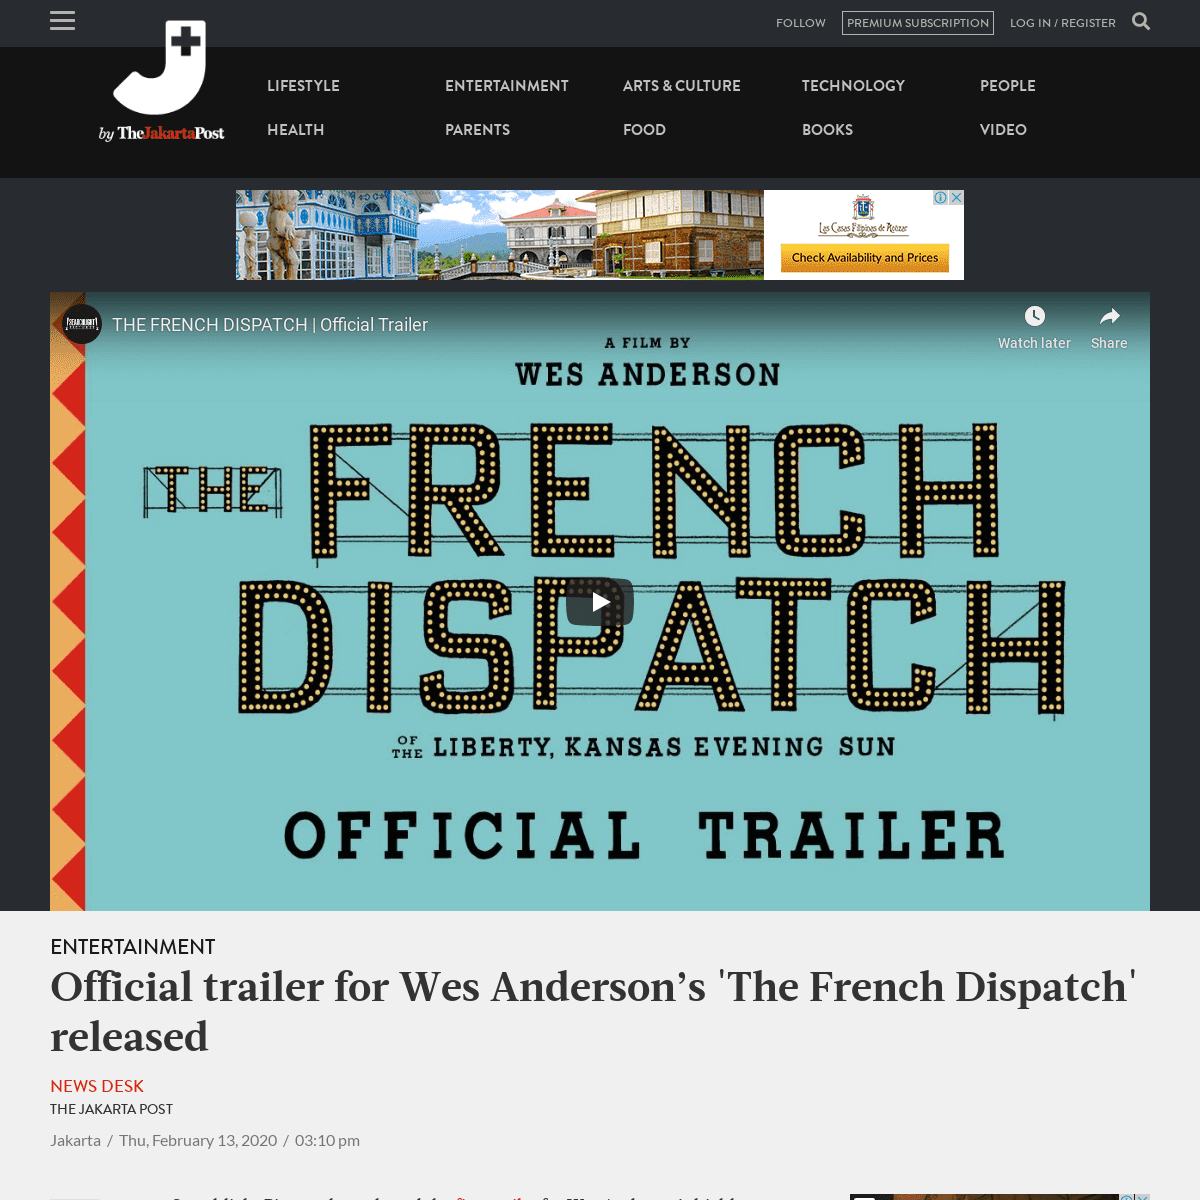 A complete backup of www.thejakartapost.com/life/2020/02/13/official-trailer-for-wes-andersons-the-french-dispatch-released.html